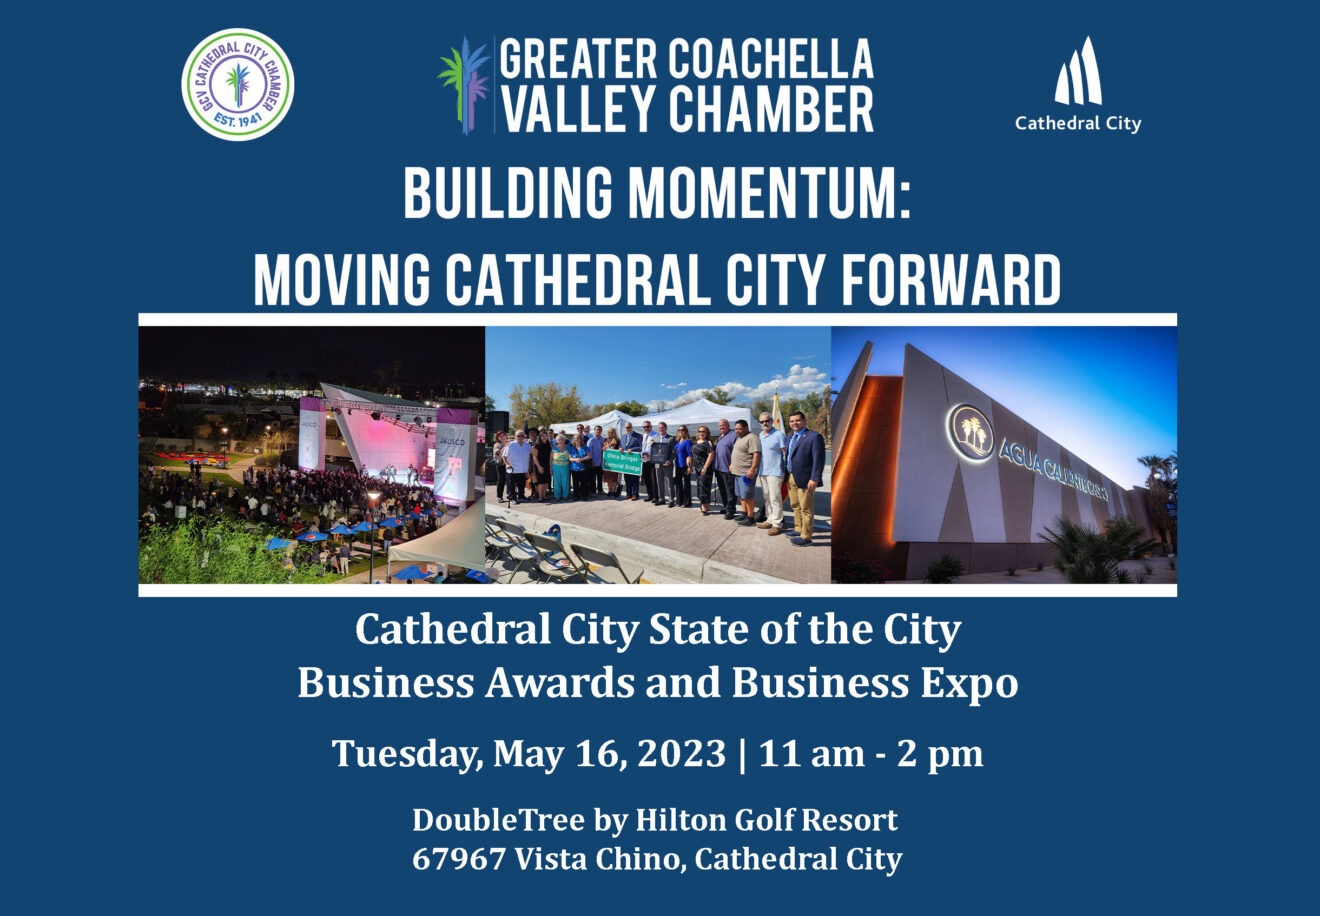 Greater Coachella Valley Chamber of Commerce Announces 2023 State of the City Business Awards & Expo for May 16, 2023